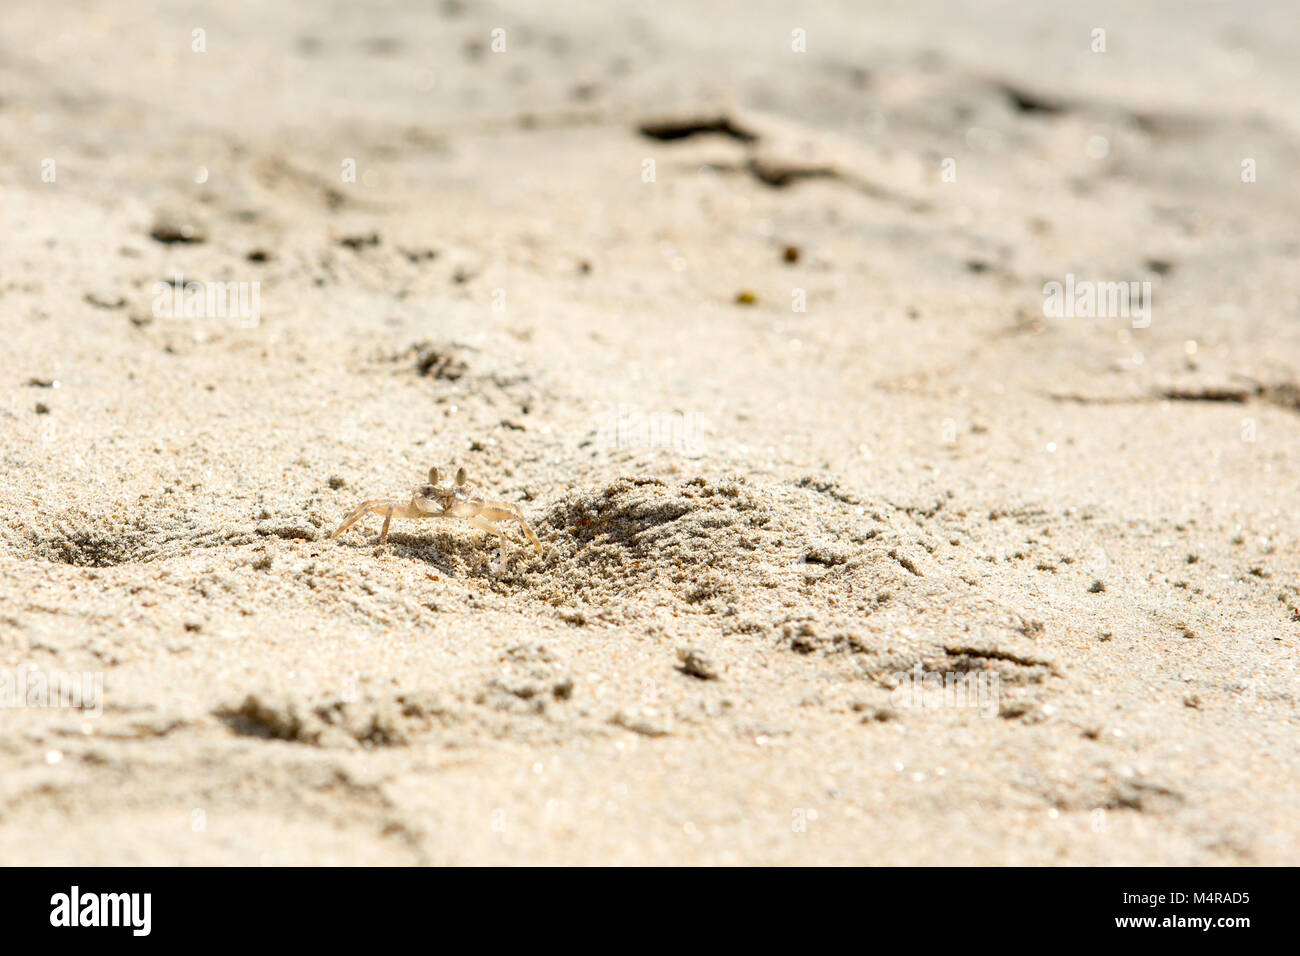 Small crabs on the beach in the sand Stock Photo